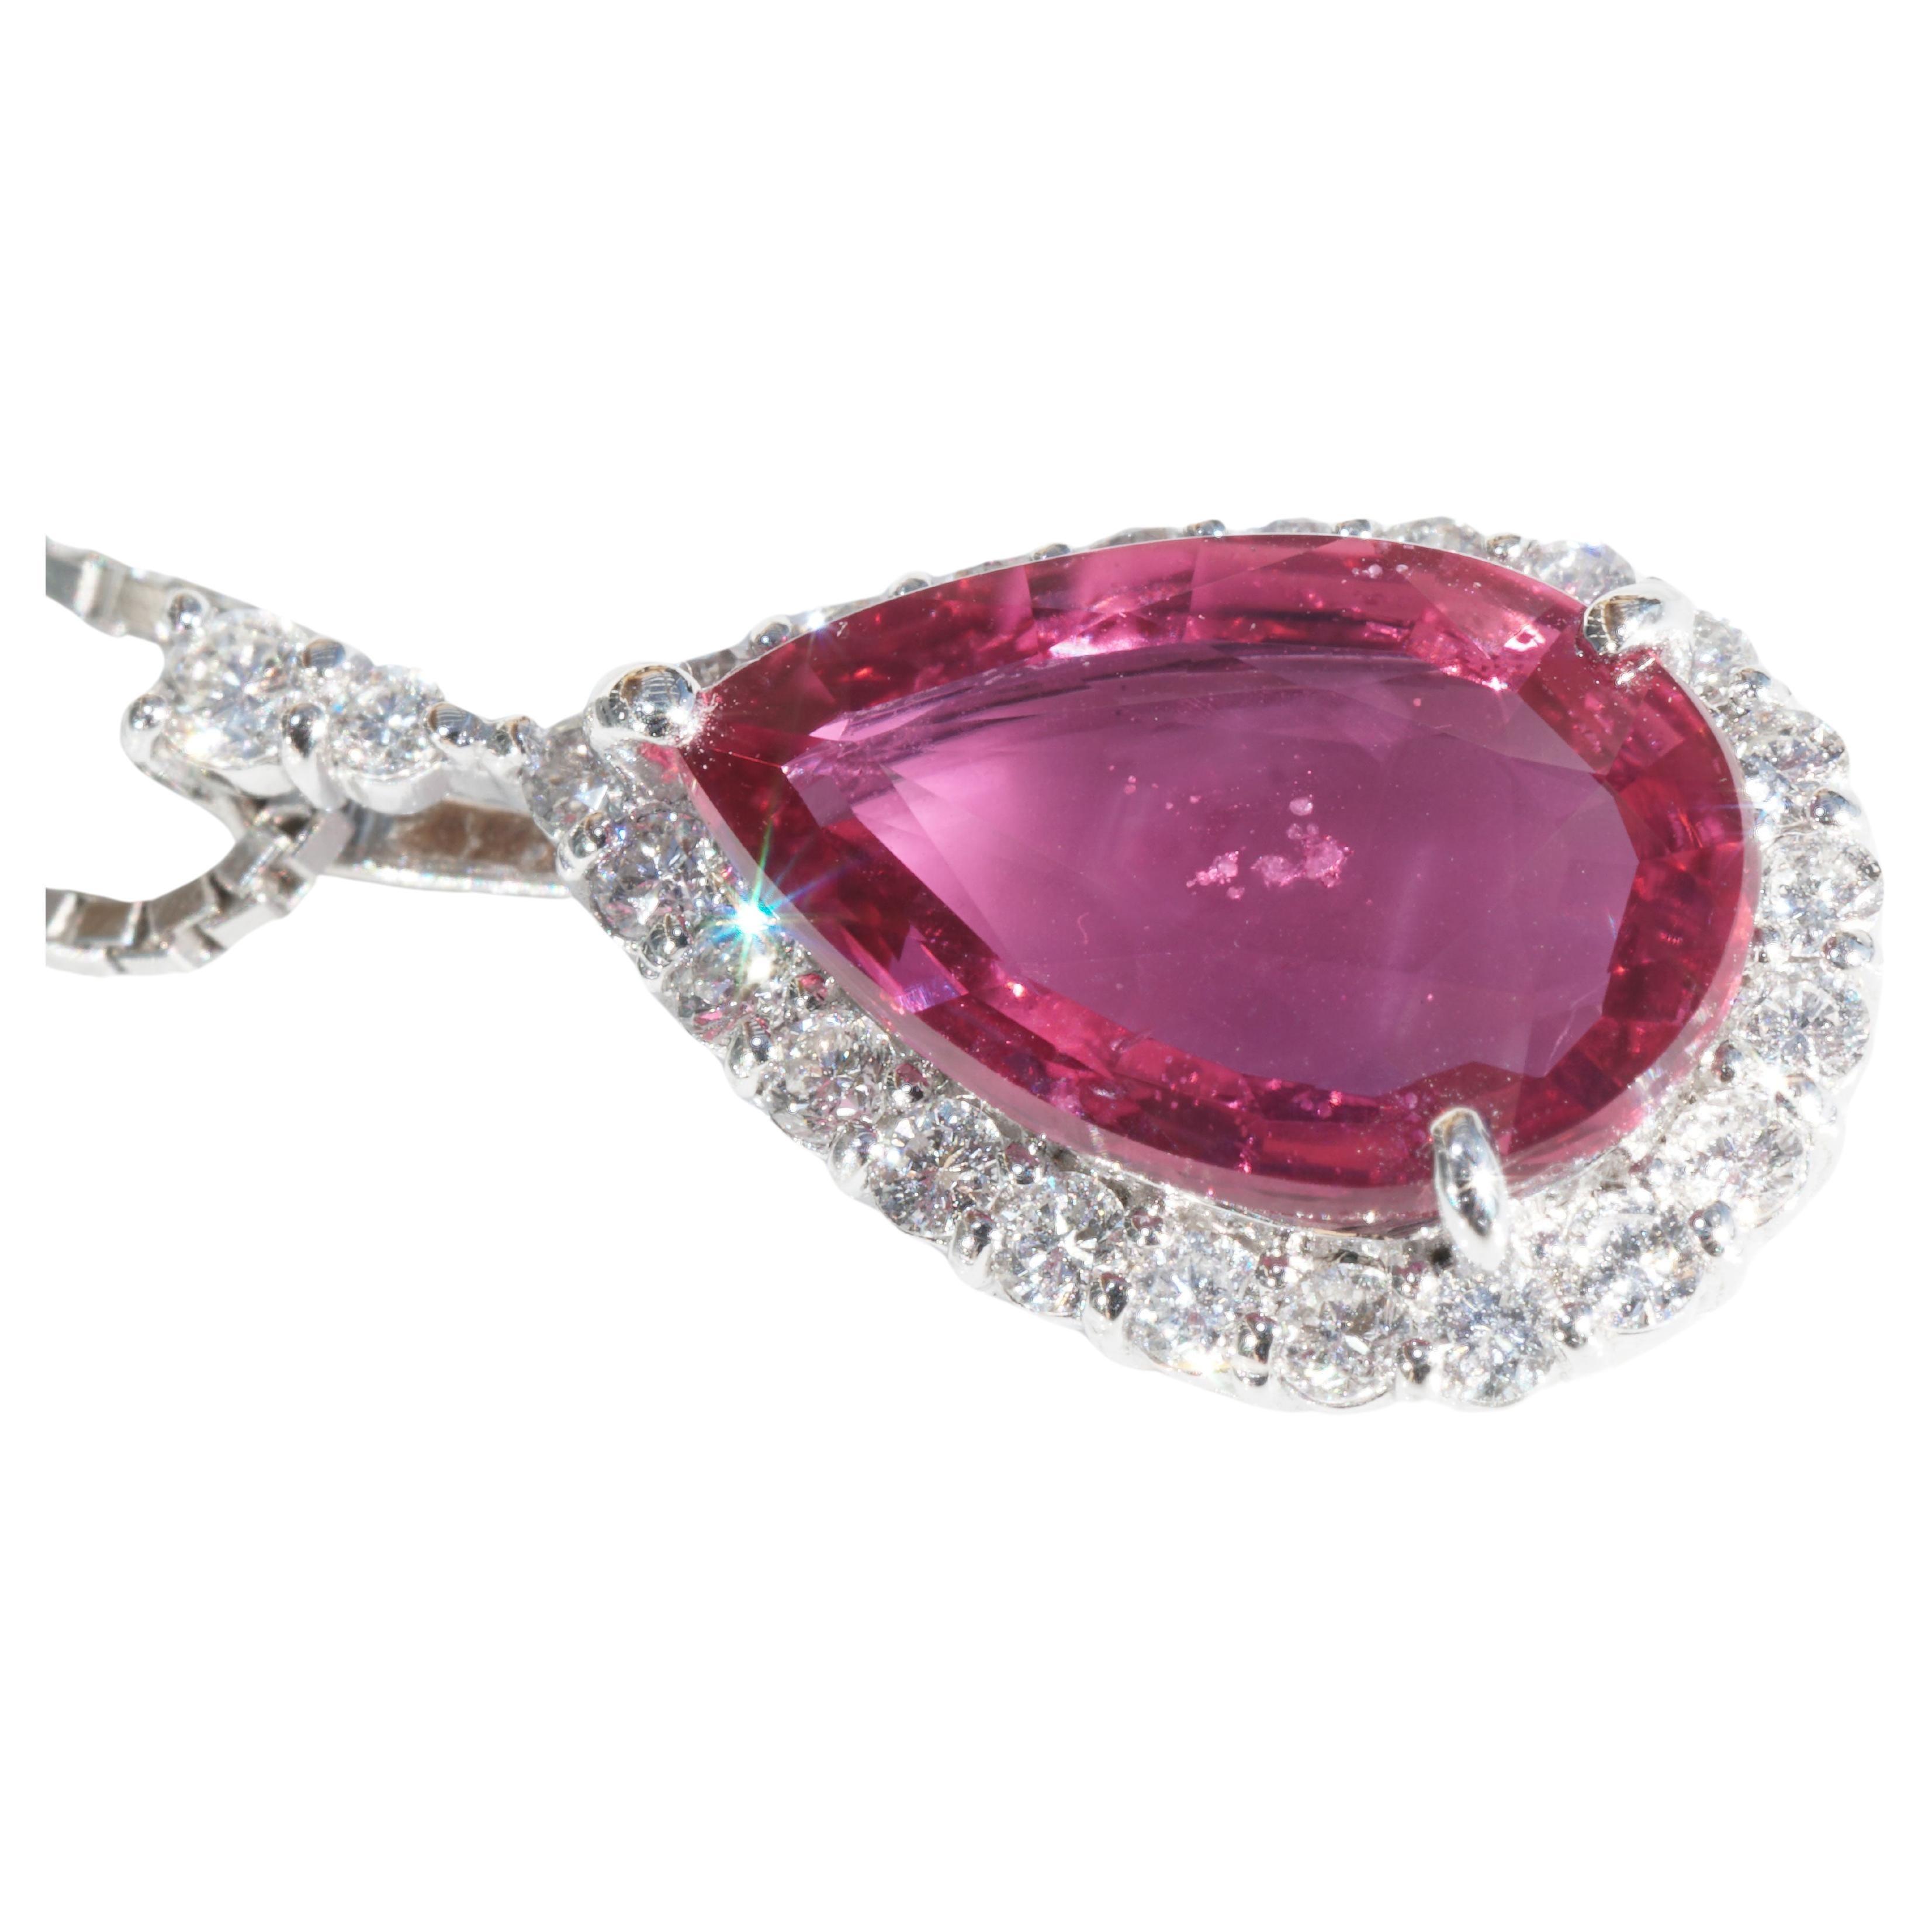 a three carat ruby is considered a rarity rubies are found as not so large rough crystals and are usually not so large after cutting, this unheated ruby drop from Mozambique is therefore an exceptional stone, with AIGS certificate dated 10.07.2023